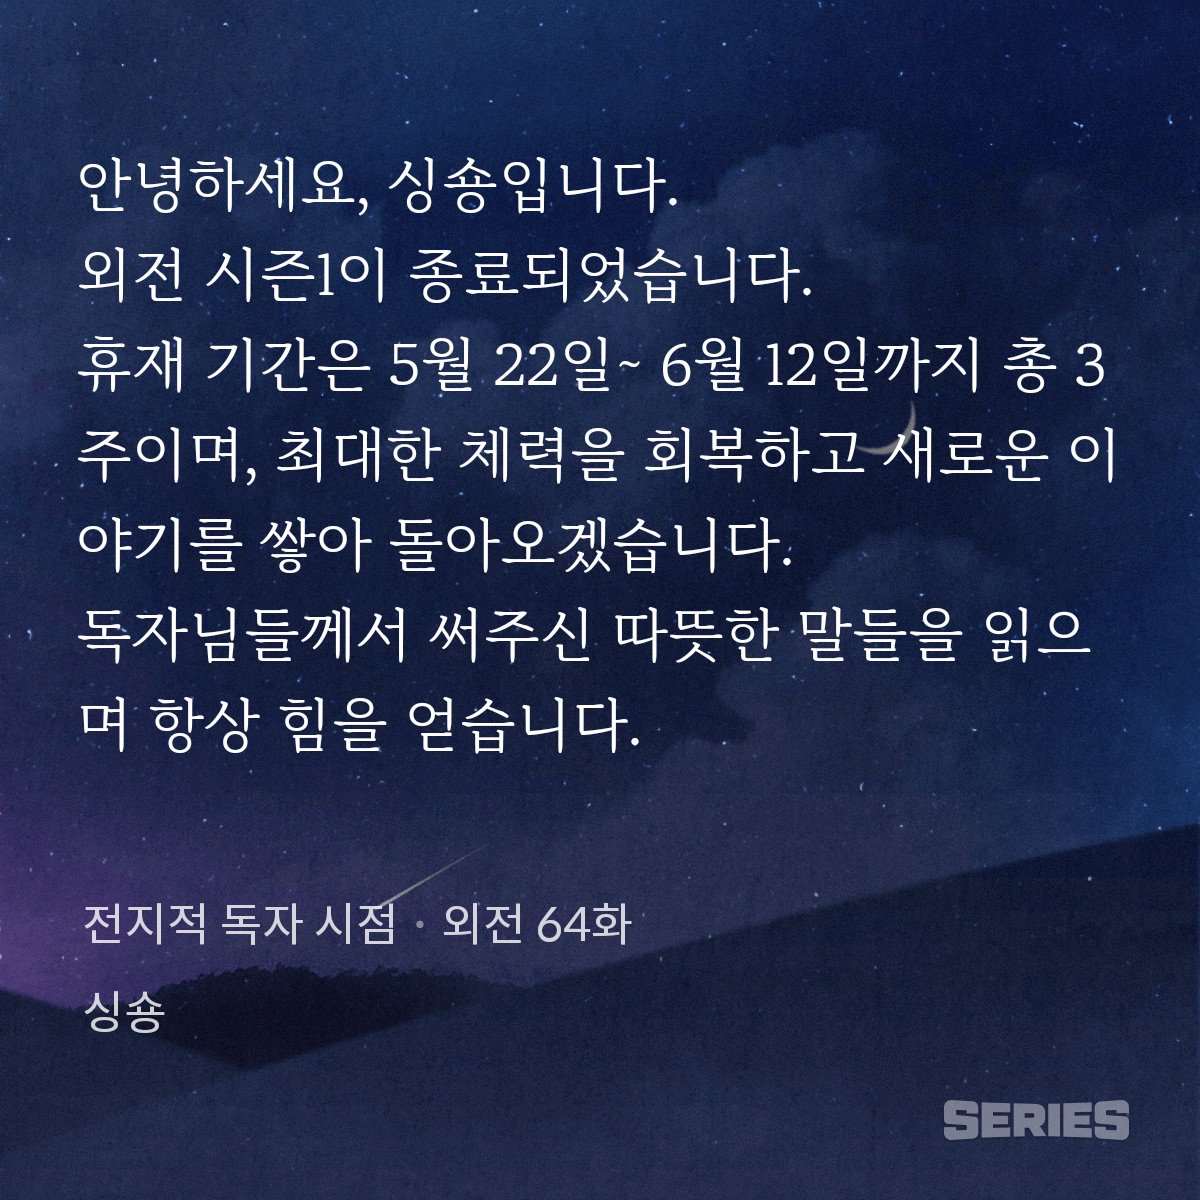 'Hello, this is SingNSong.
The side story's season 1 is completed. There will be a hiatus from May 22nd to June 12nd for about three weeks, we will recover our strength and will be back with the new prepared story. We always get strength from reading your warm words.'

(1/3)